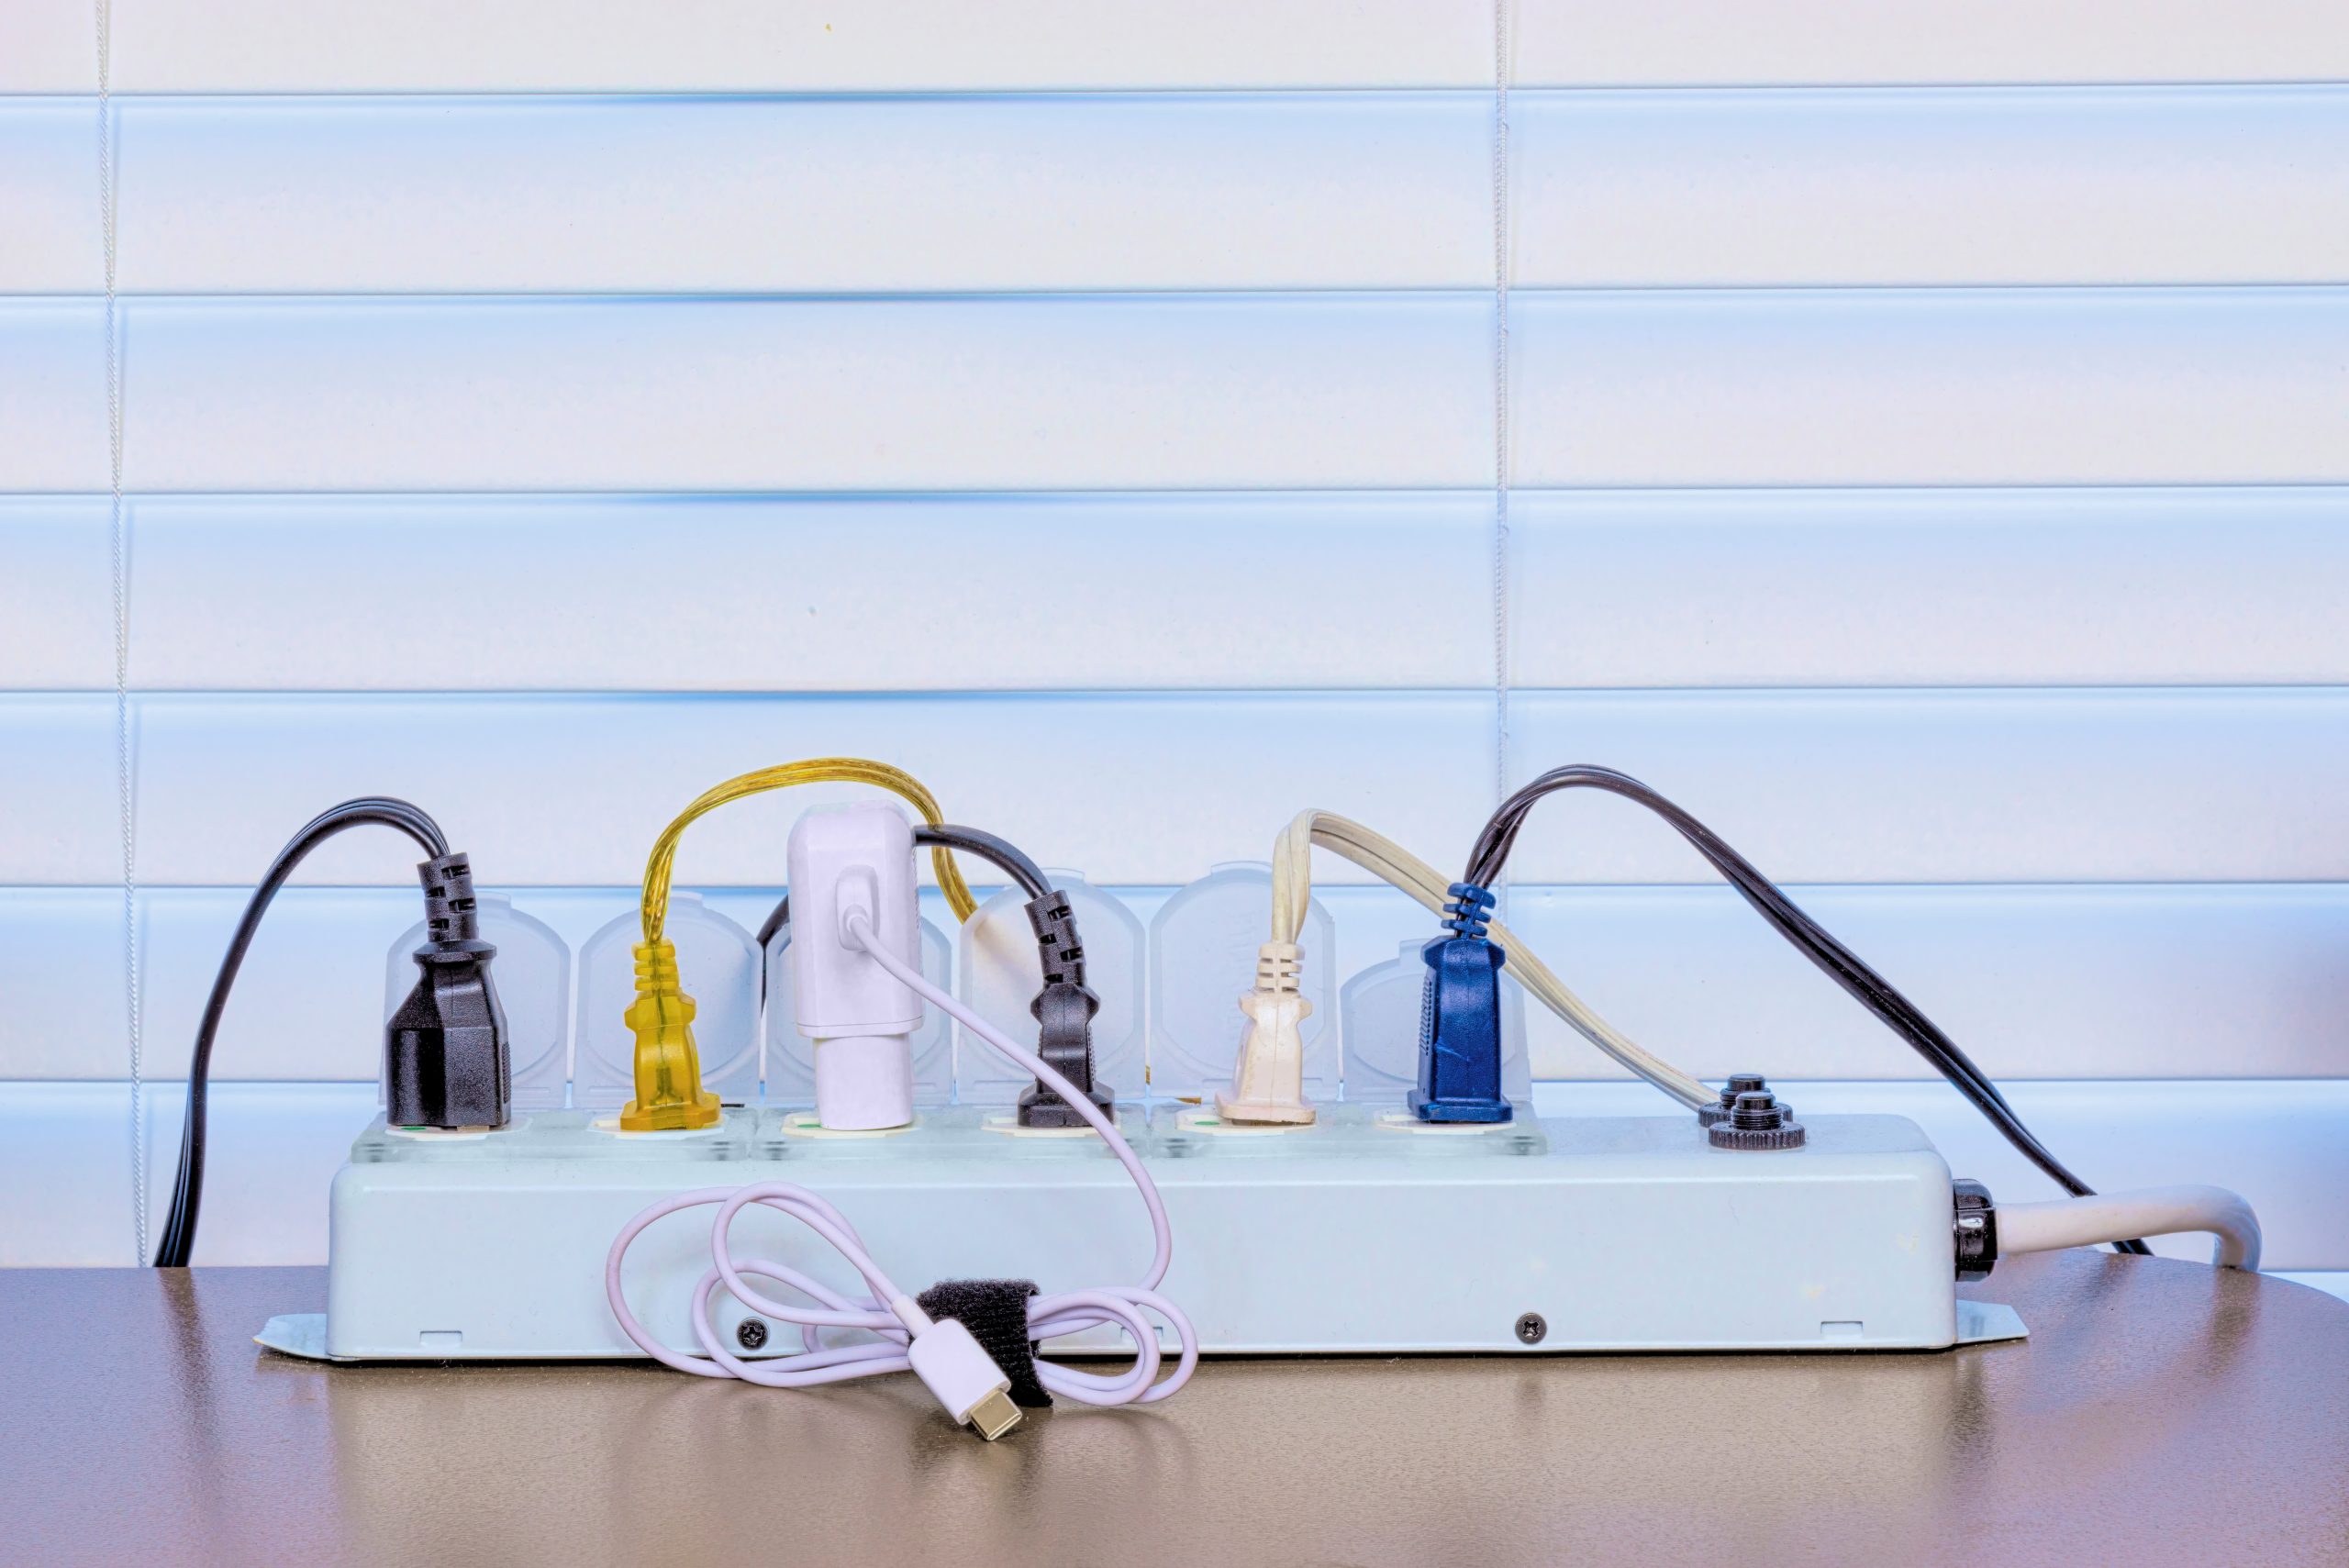 Horizontal shot of a full power strip on a desk in front of a Venetian blind background.